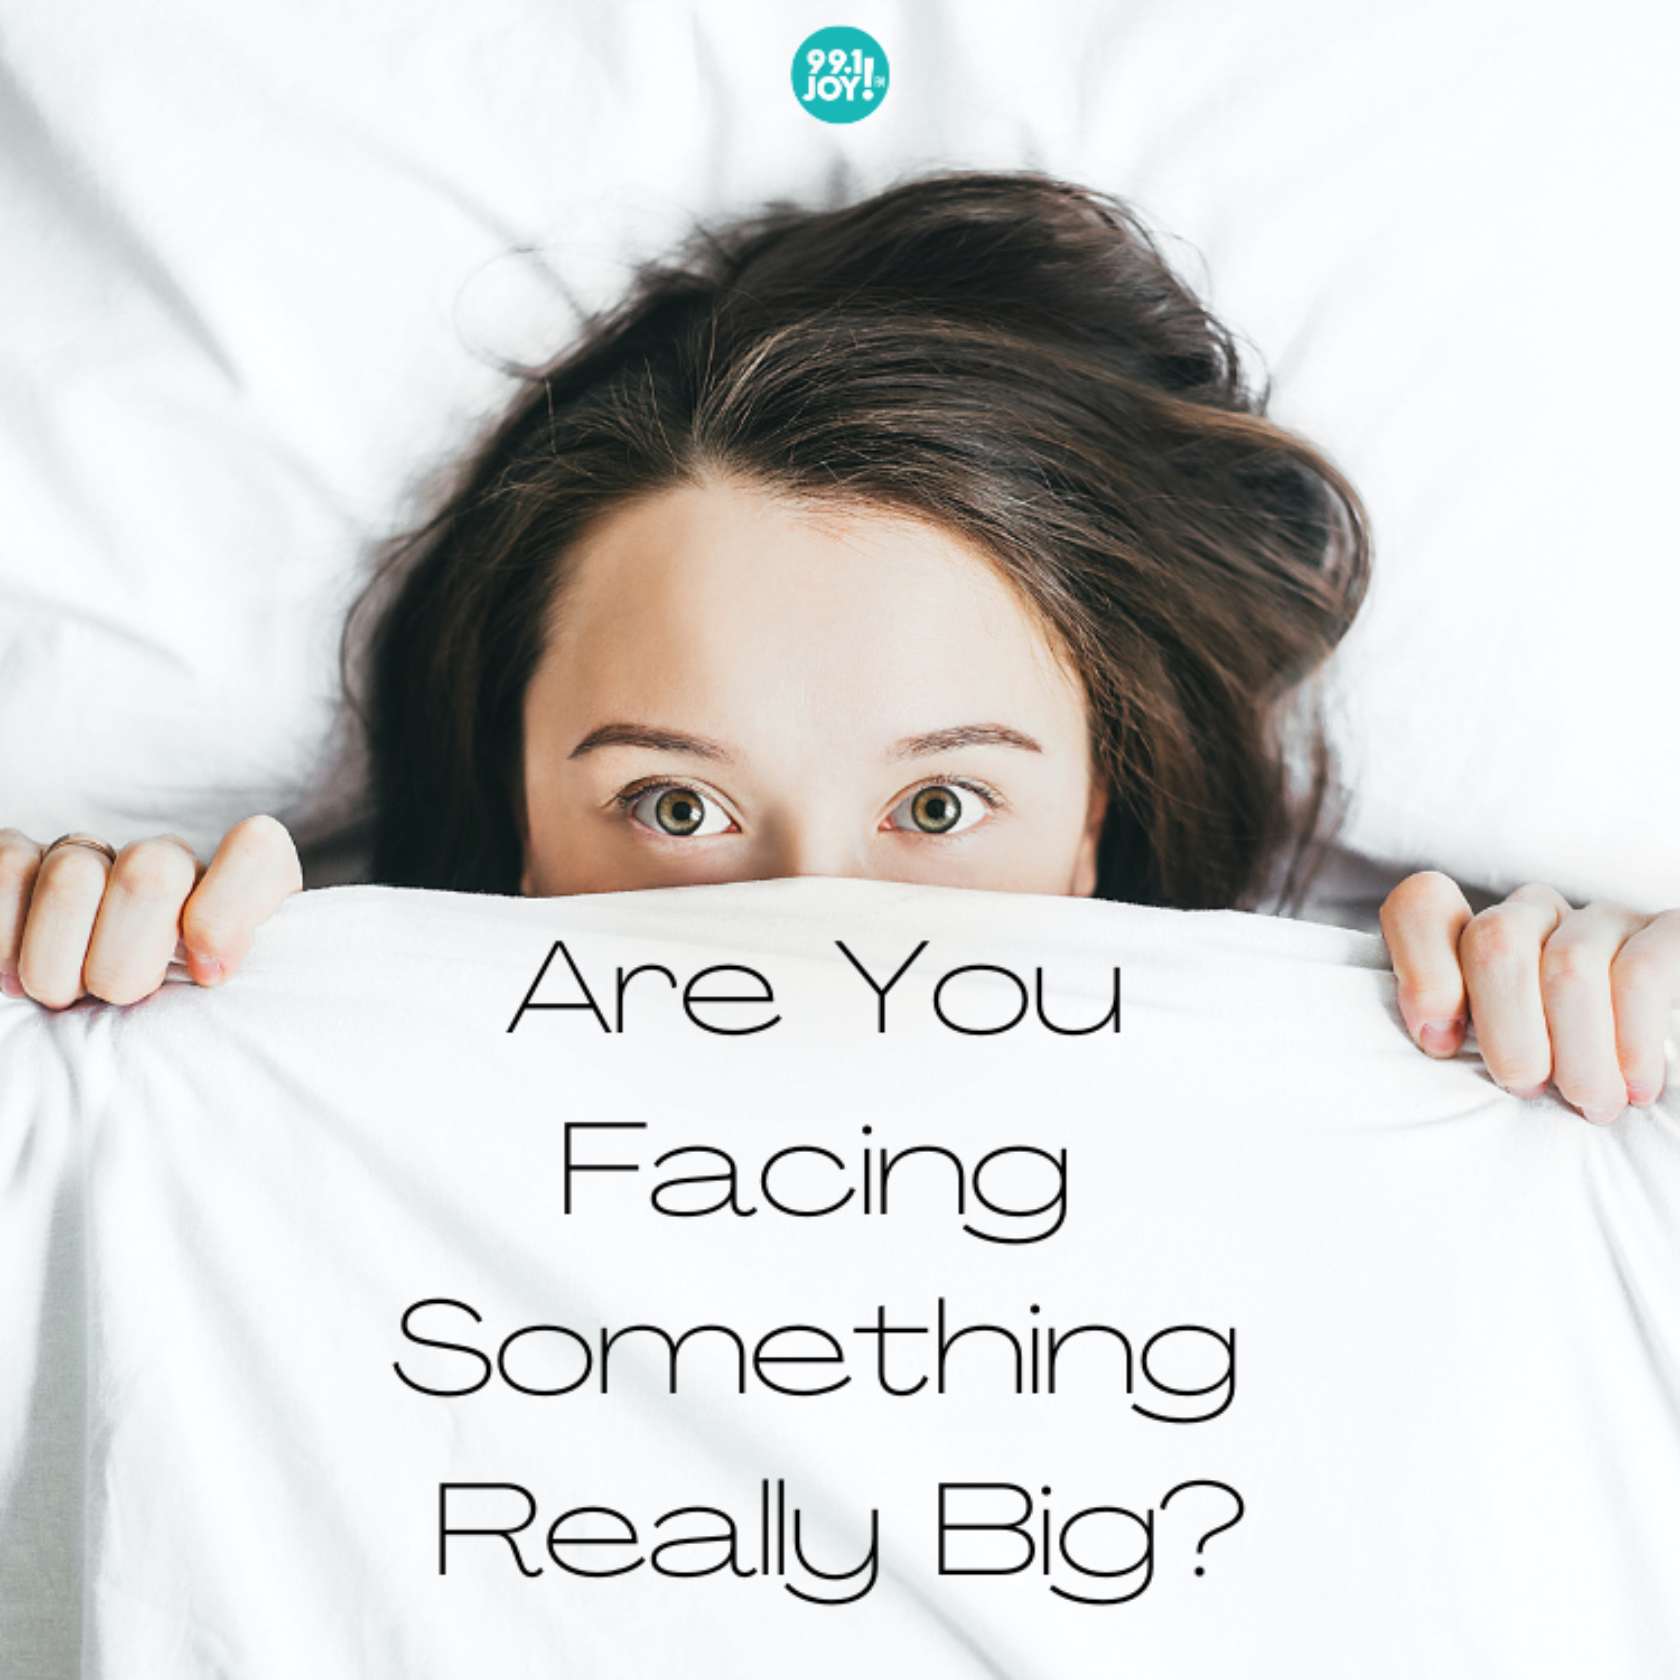 Are You Facing Something Really Big?